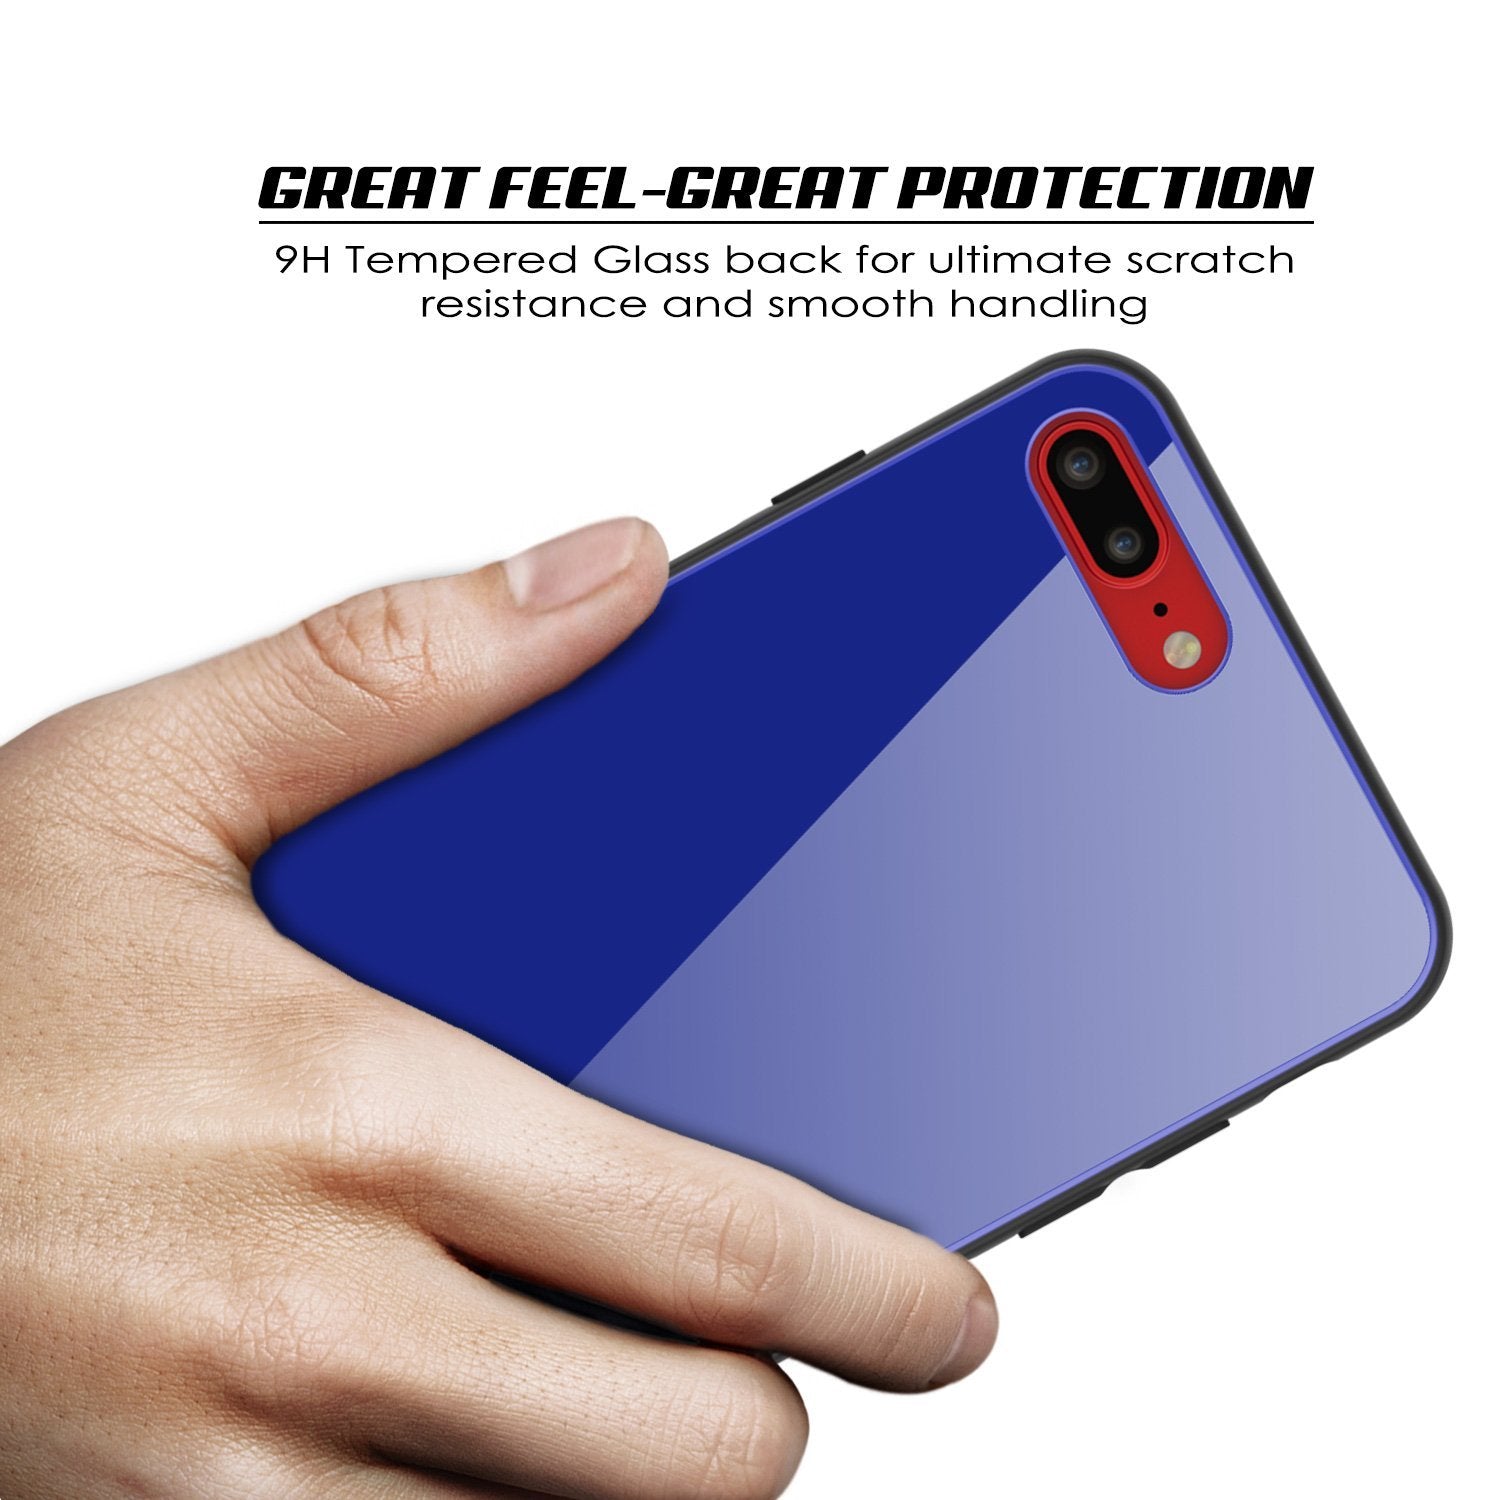 iPhone 8 PLUS Case, Punkcase GlassShield Ultra Thin Protective 9H Full Body Tempered Glass Cover W/ Drop Protection & Non Slip Grip for Apple iPhone 7 PLUS / Apple iPhone 8 PLUS (Blue) - PunkCase NZ